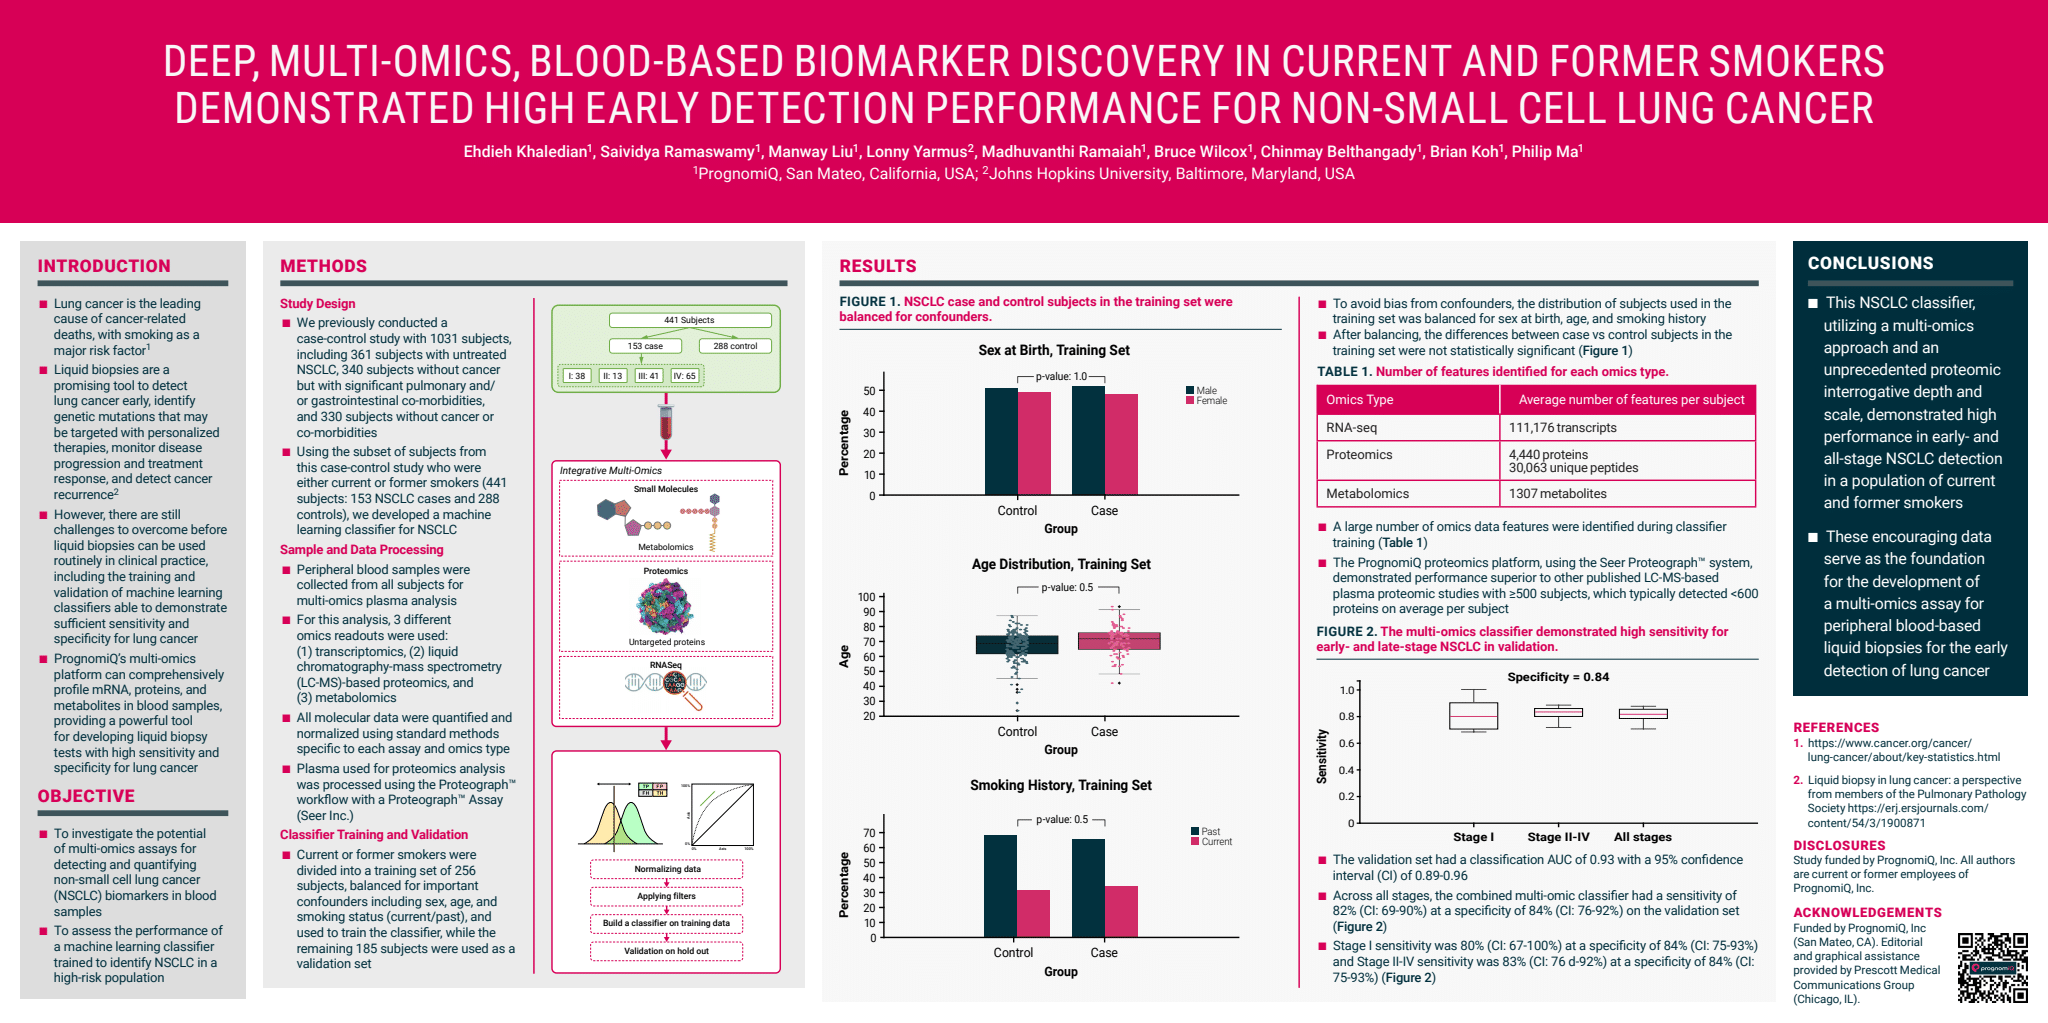 scientific poster showing a deep, multiomics, blood-based biomarker discovery in current and former smokers demonstrated high early detection performance for non-small cell lung cancer